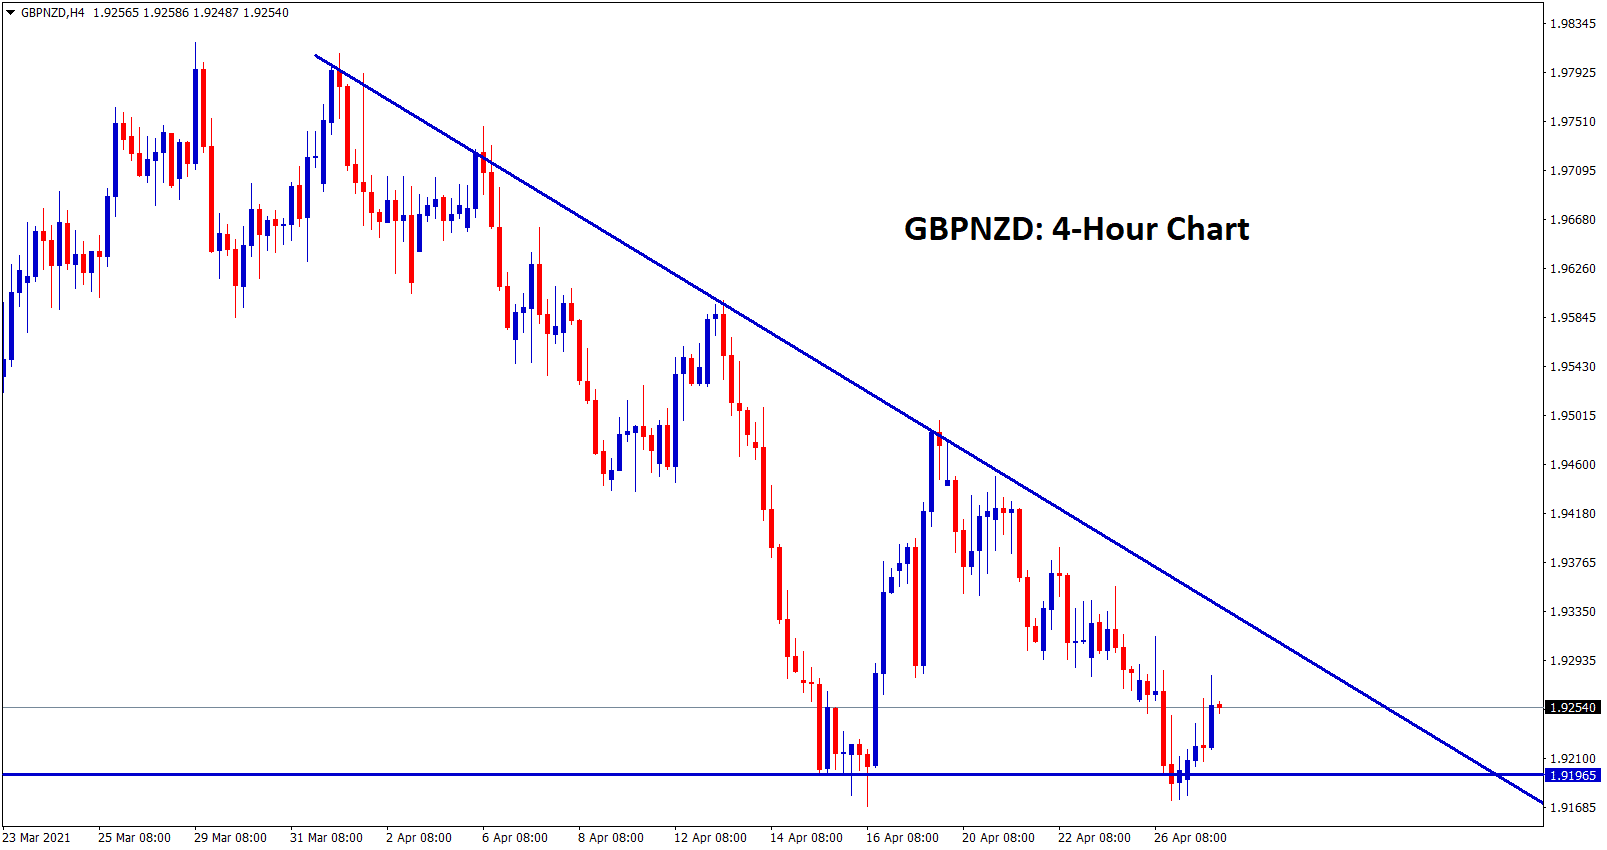 GBPNZD formed a Descending Triangle pattern